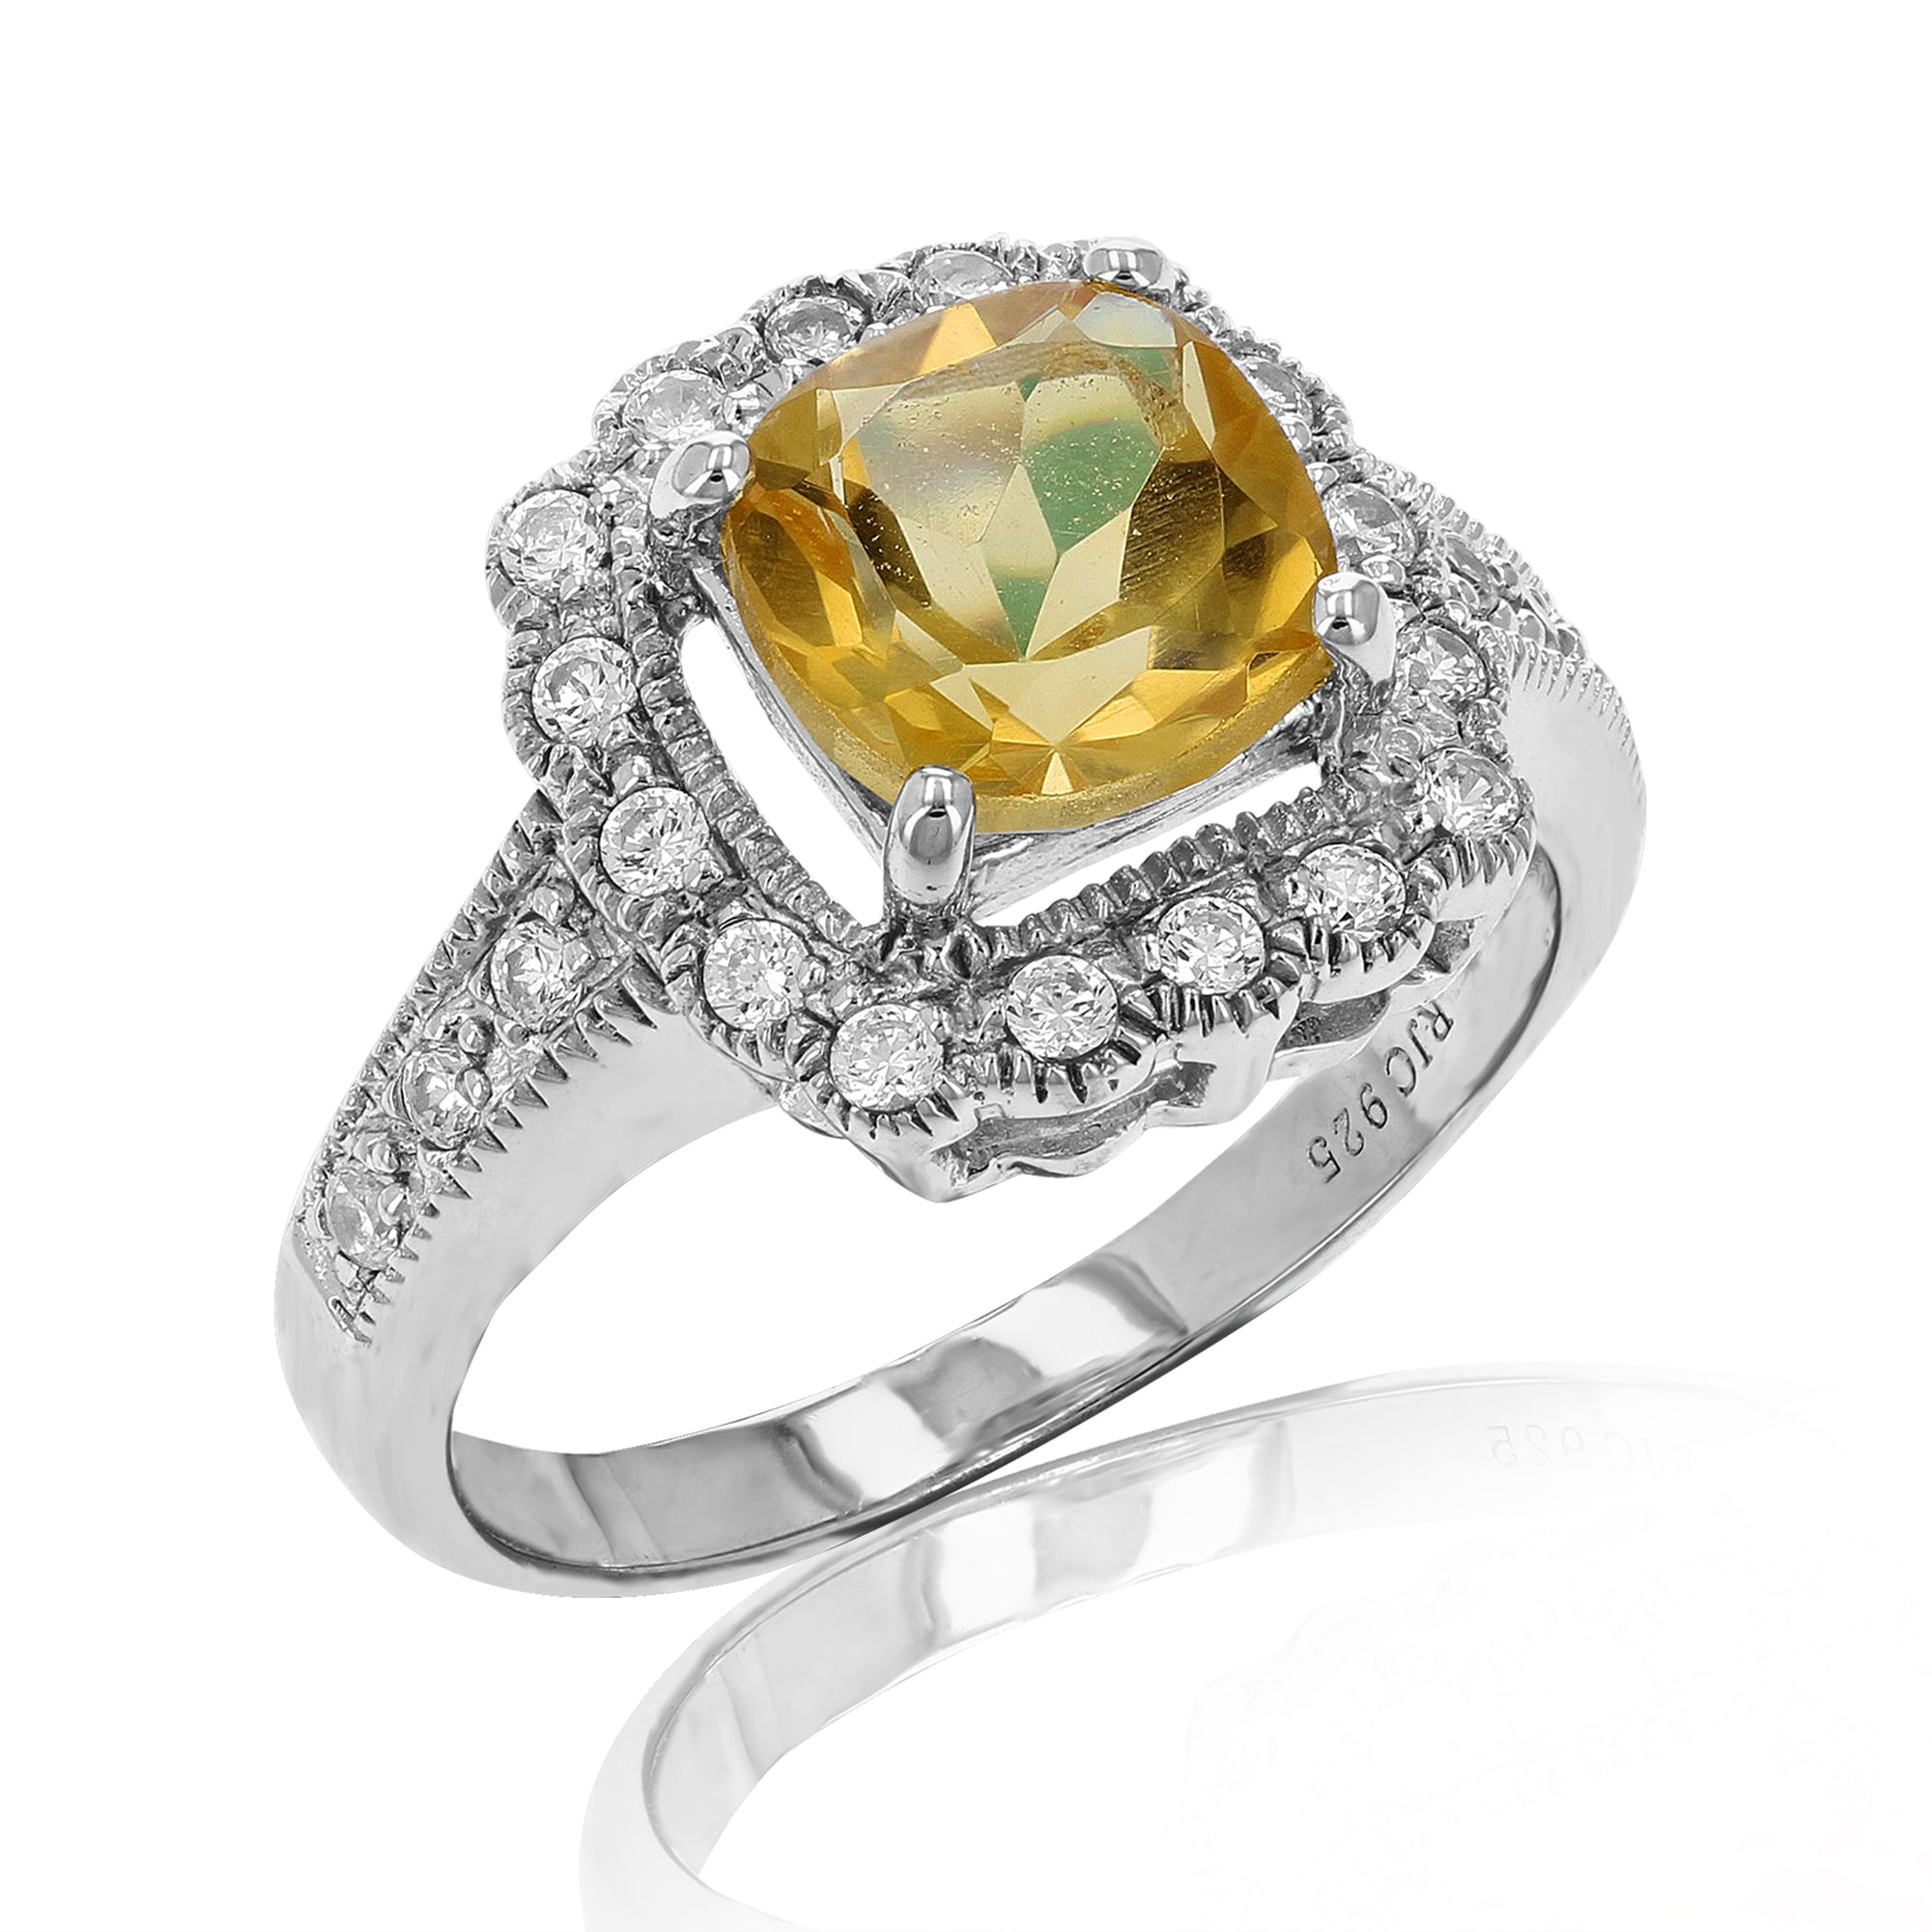 1.10 cttw 7 MM Cushion Cut Citrine Ring .925 Sterling Silver Halo with Rhodium